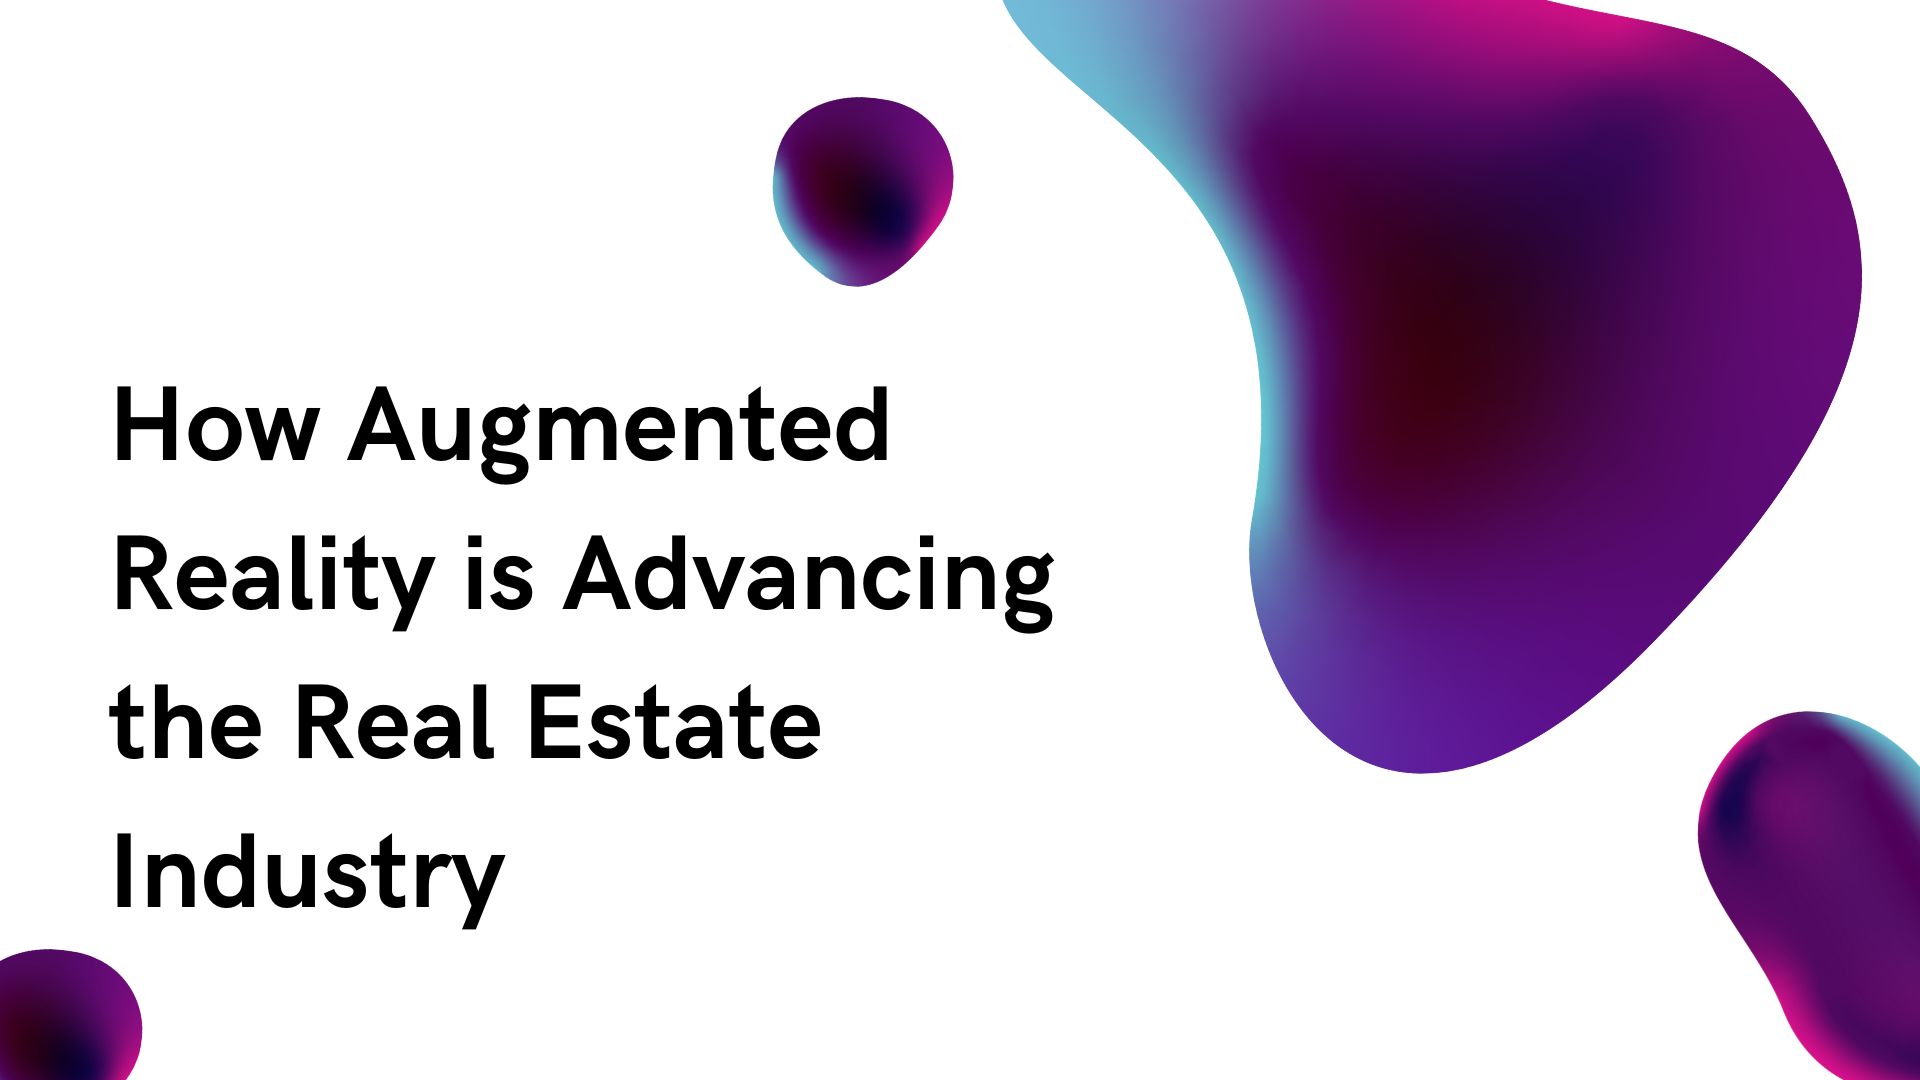 How the real estate sector is being advanced by augmented reality